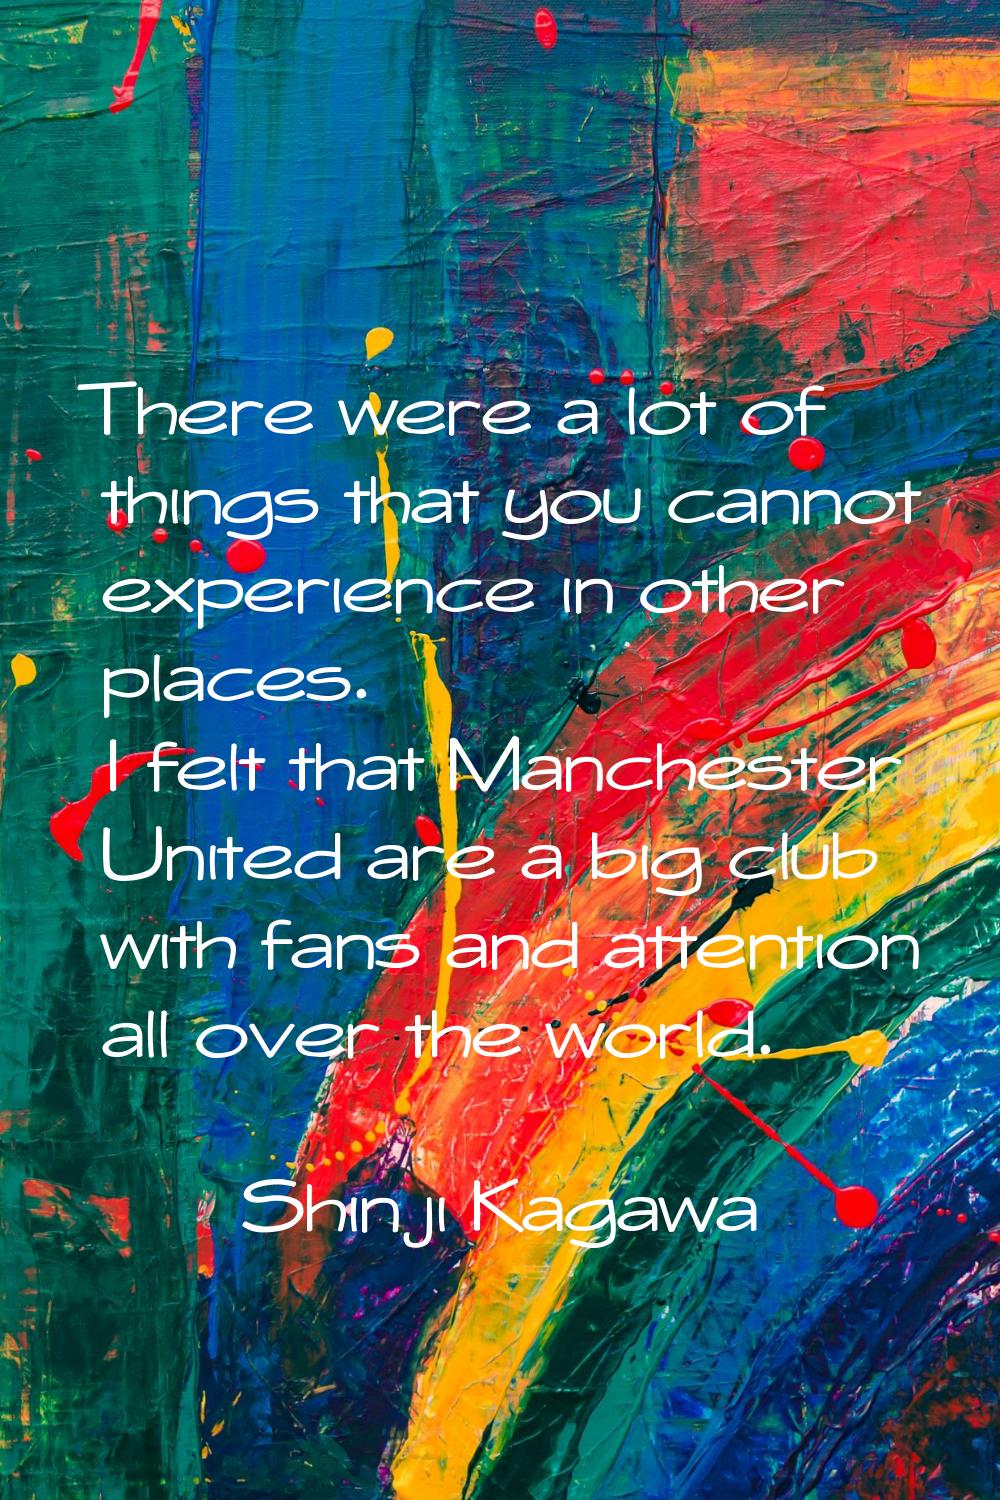 There were a lot of things that you cannot experience in other places. I felt that Manchester Unite